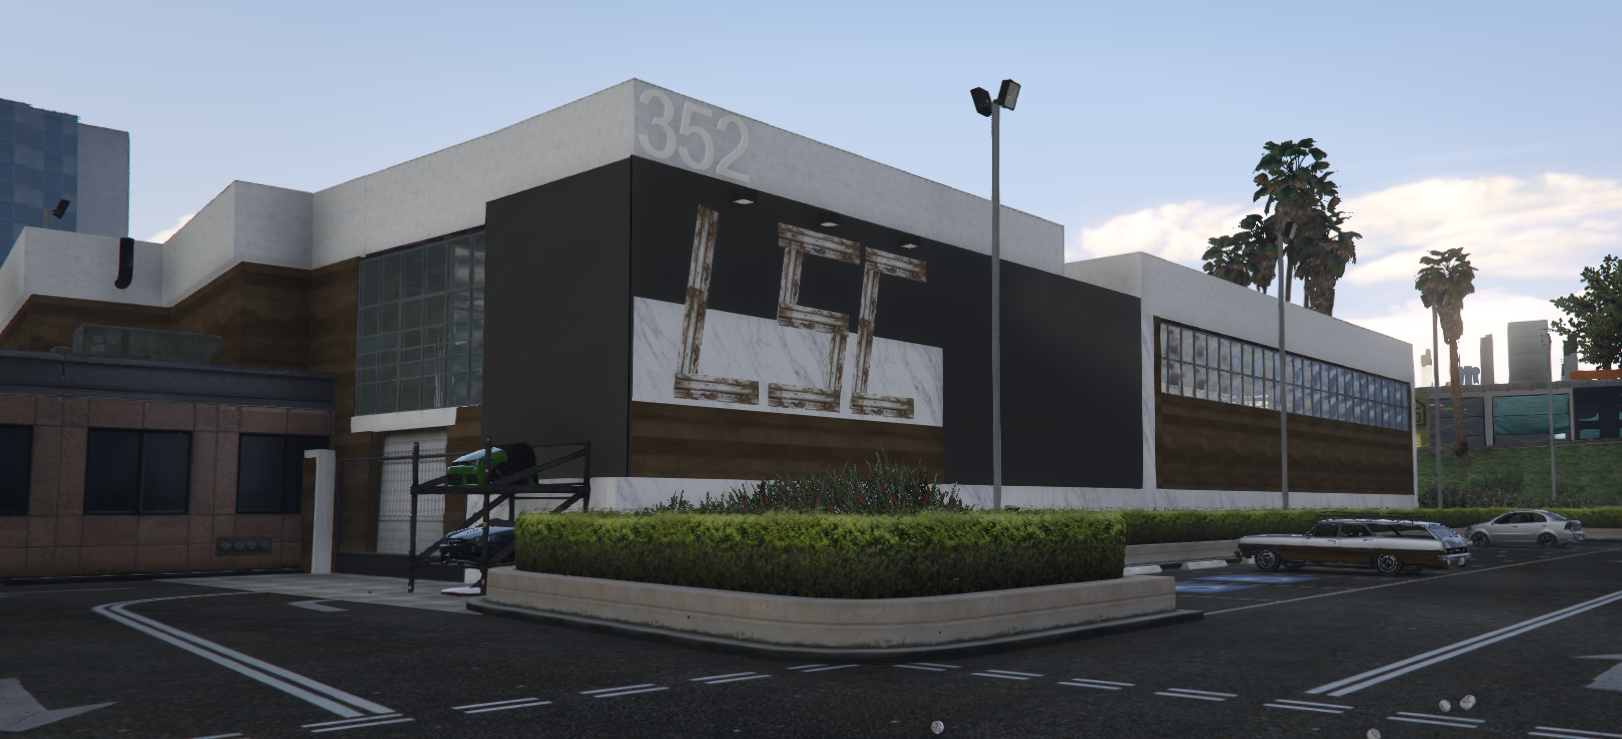 Luxury Los Santos Customs FiveM Ready Luxury Garage With Customisation  Blips Included And Luxury Offices / Esx Ready Map Script Download.